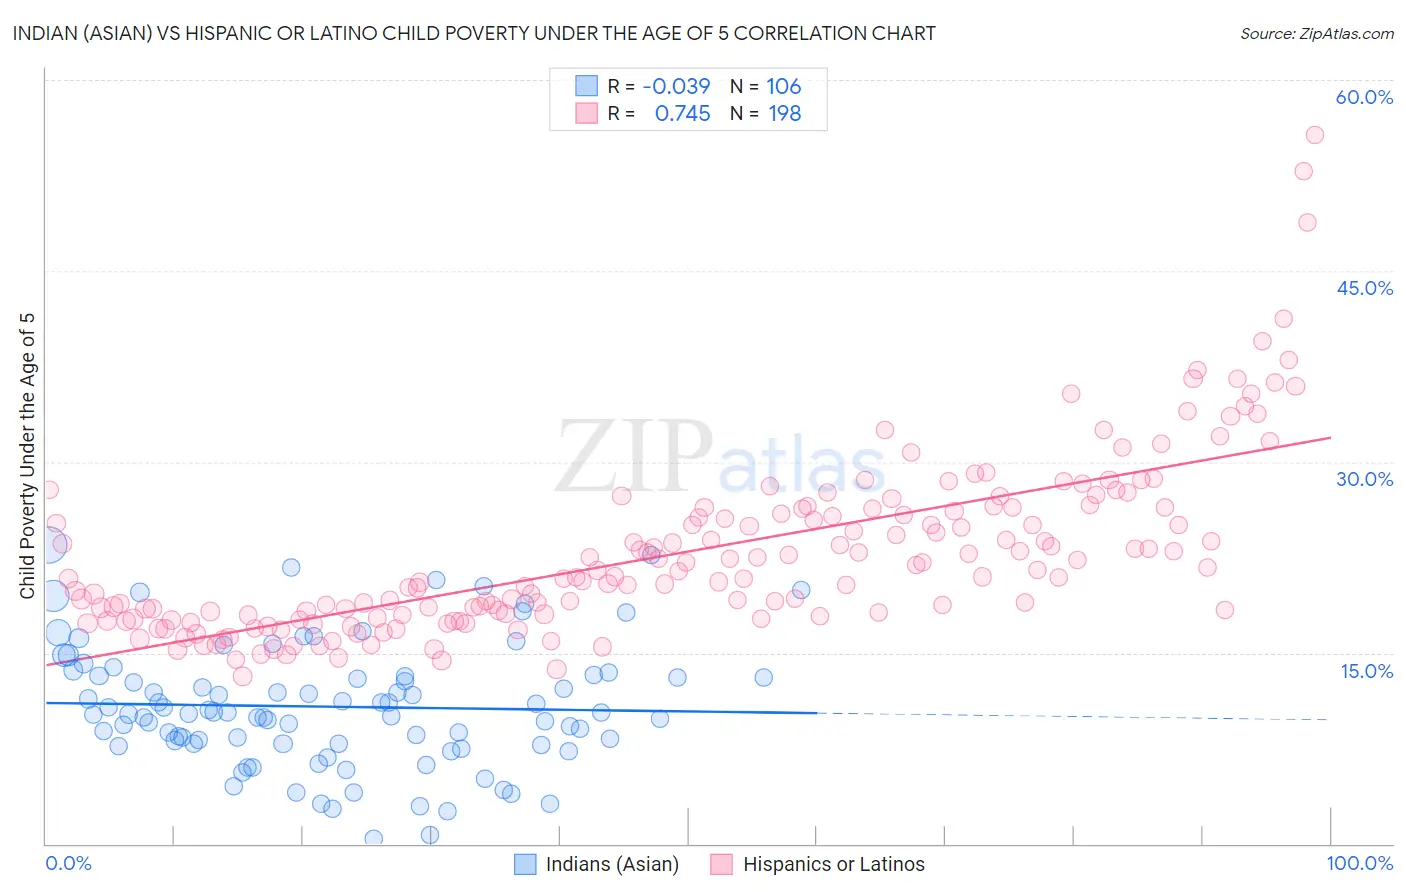 Indian (Asian) vs Hispanic or Latino Child Poverty Under the Age of 5